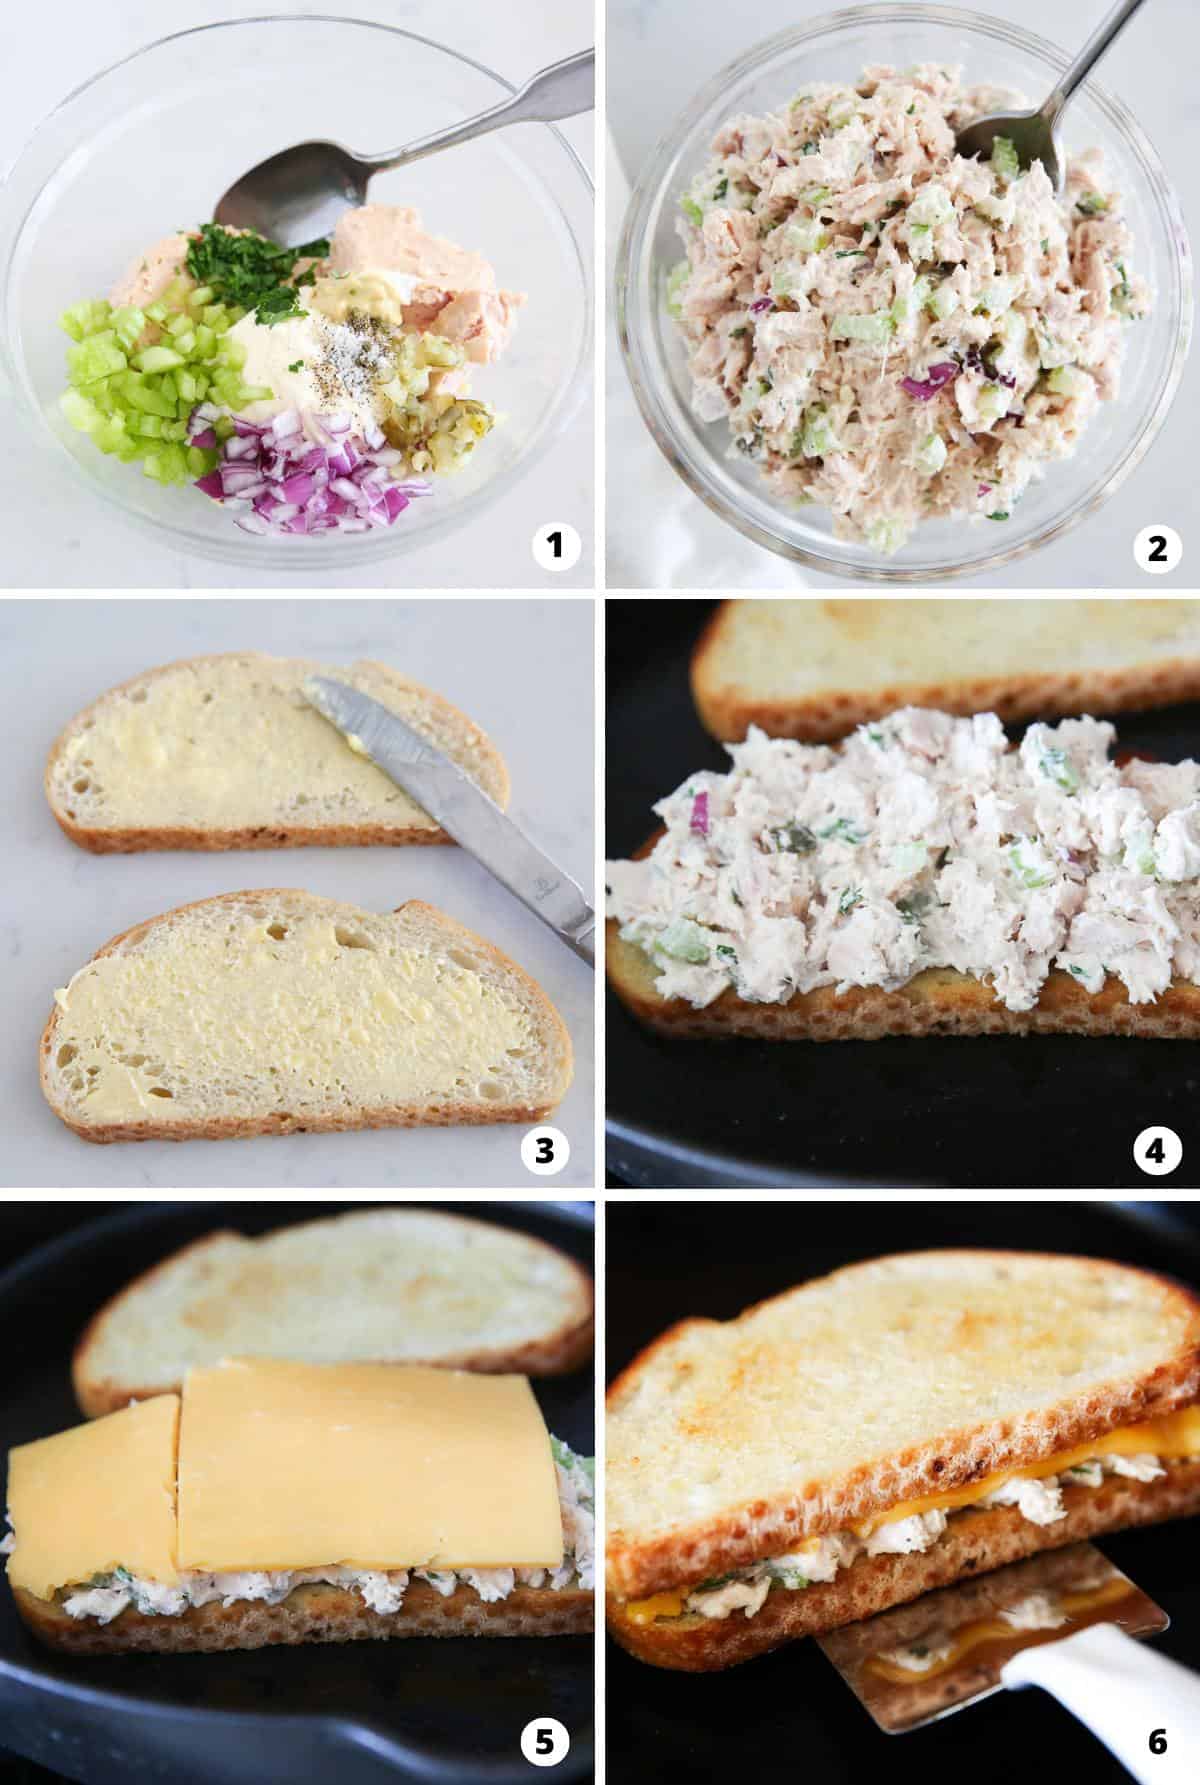 Showing how to make a tuna melt in a 6 step collage.